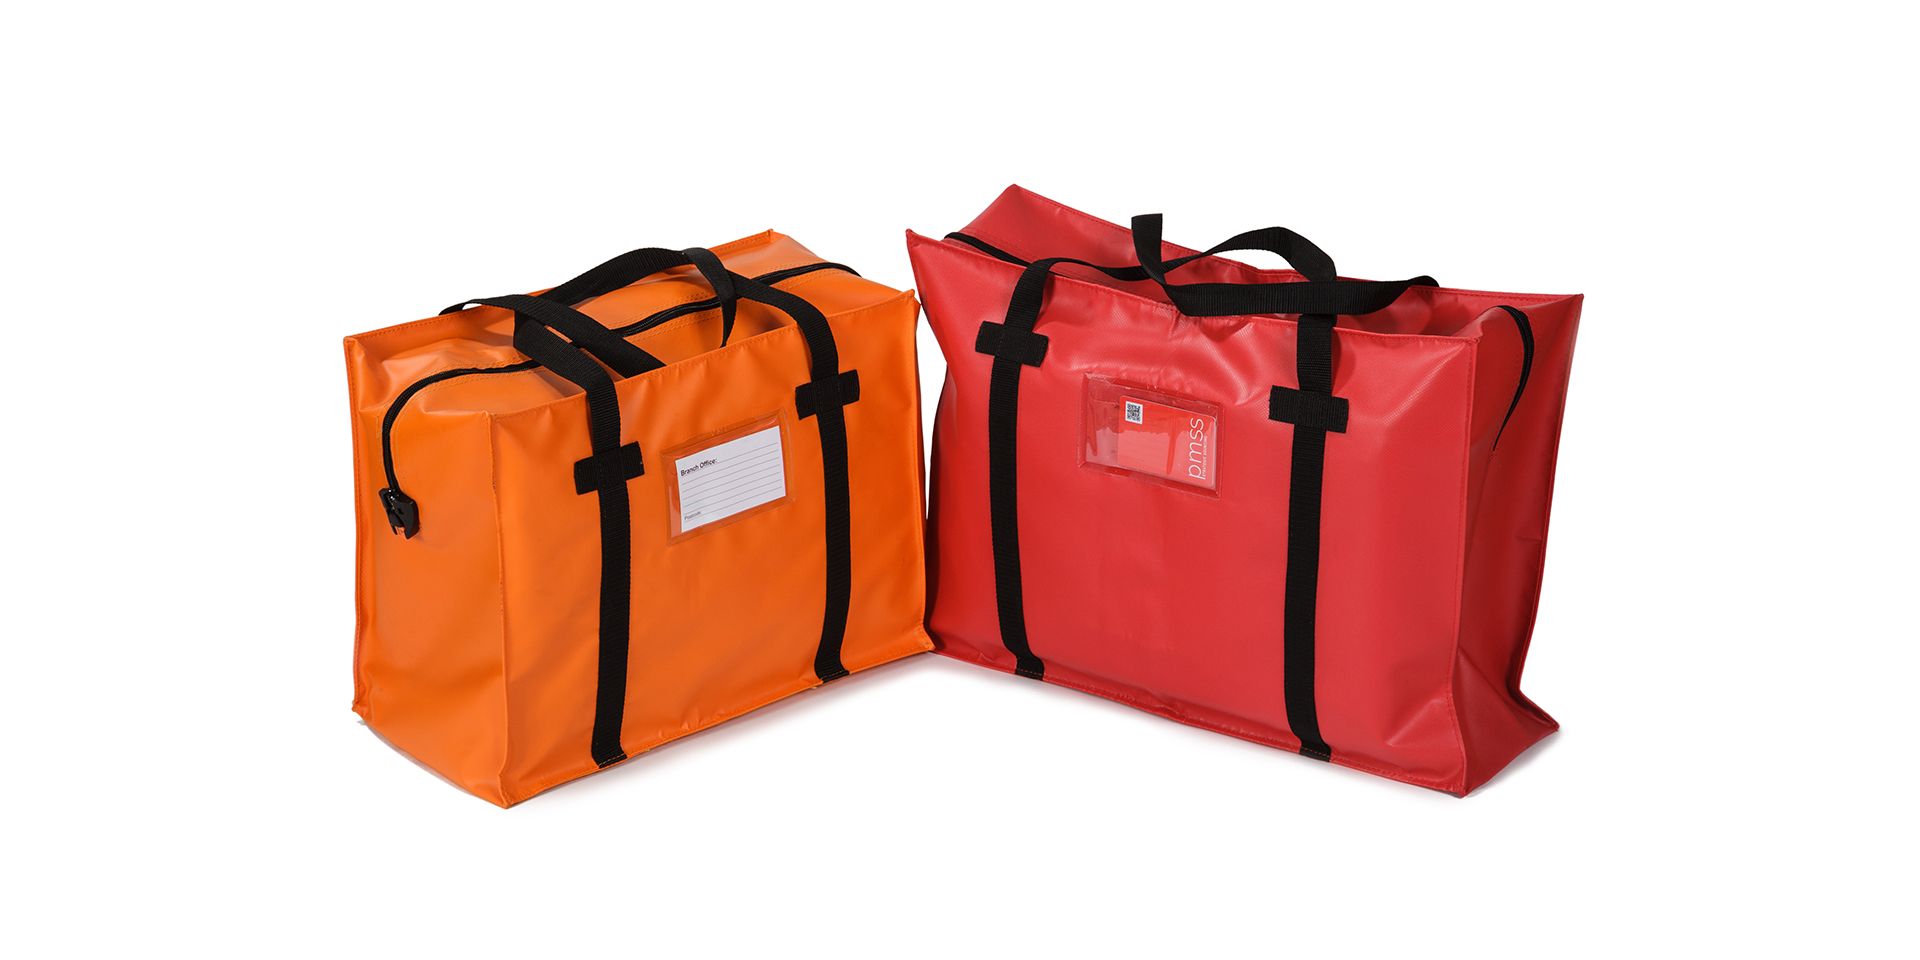 Large Zipped Bags with Carry Handles in Red and Orange